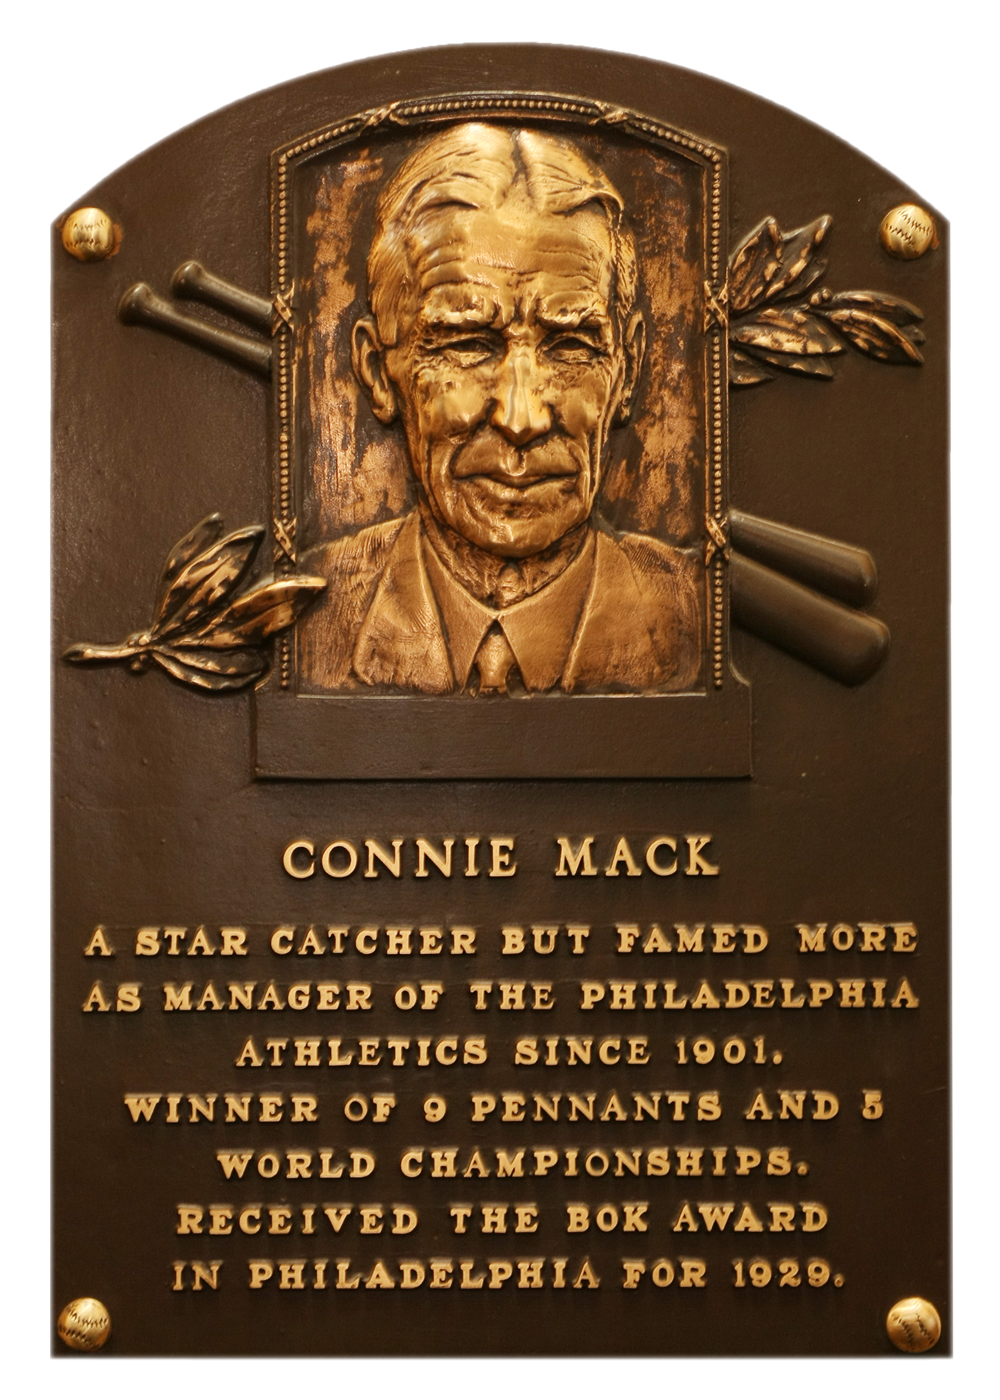 Connie Mack Hall of Fame plaque